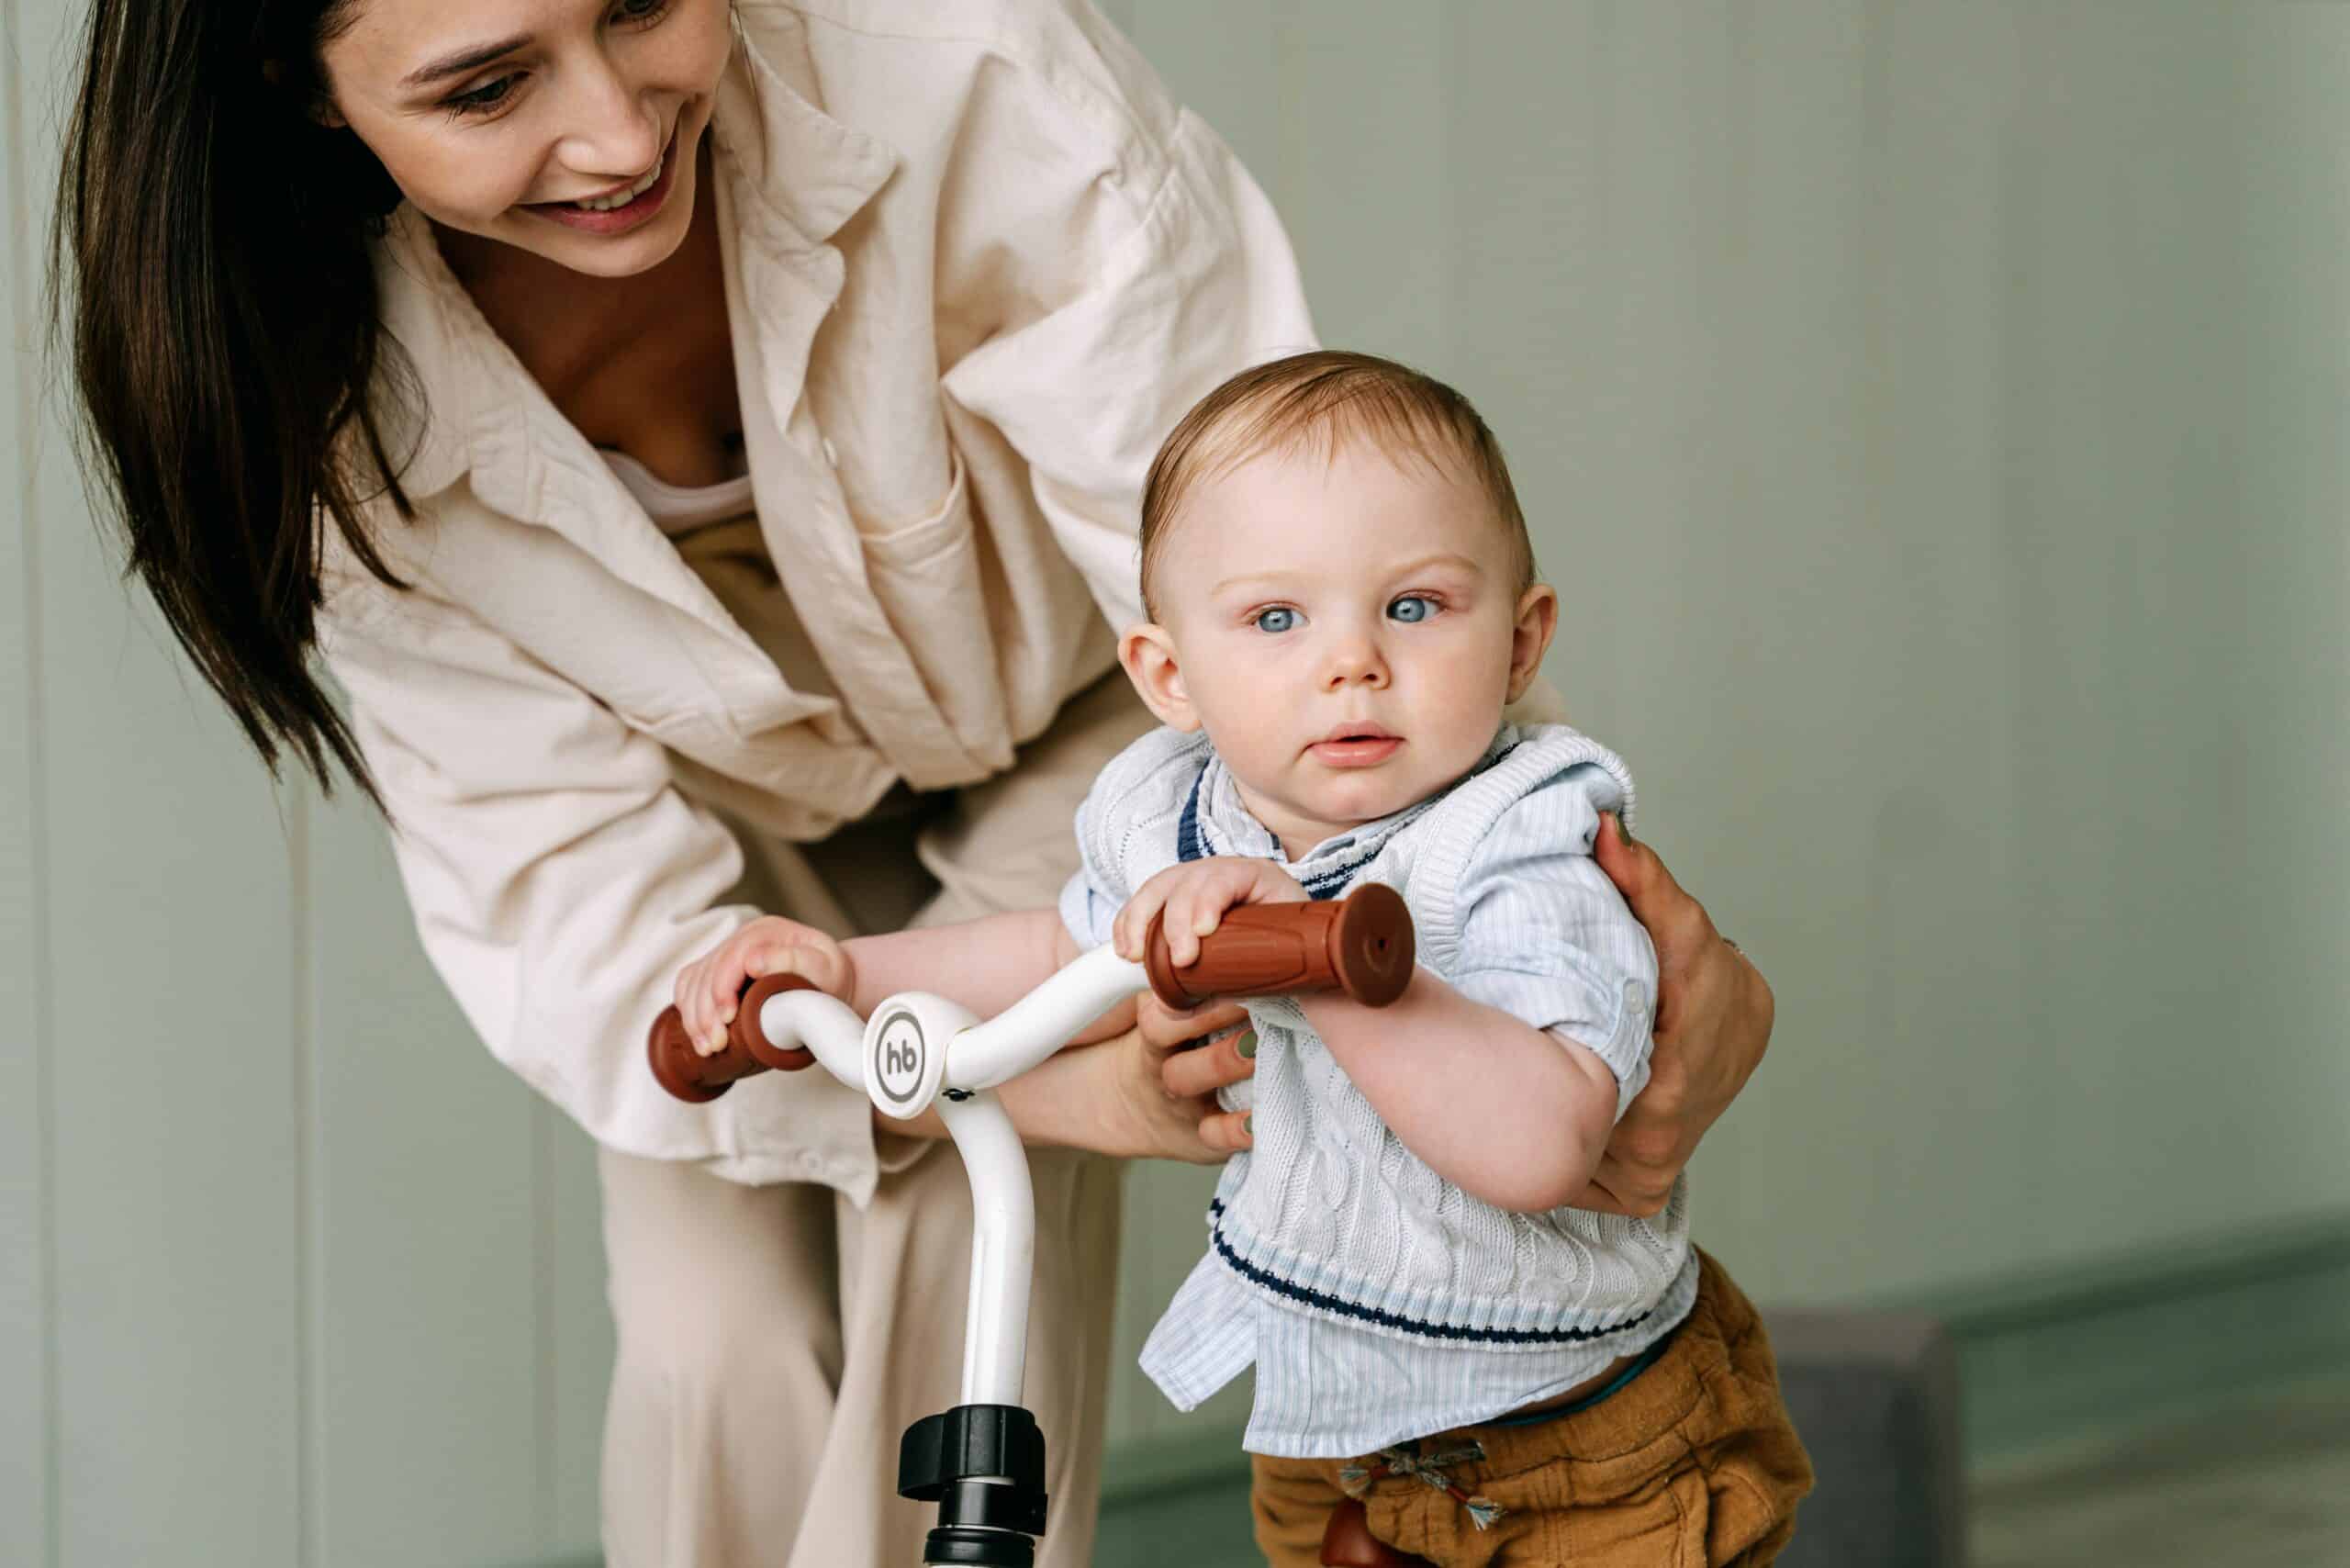 With the guidance of their nanny, children participate in physical activities and practice fine and gross motor skills, leading to improved motor development